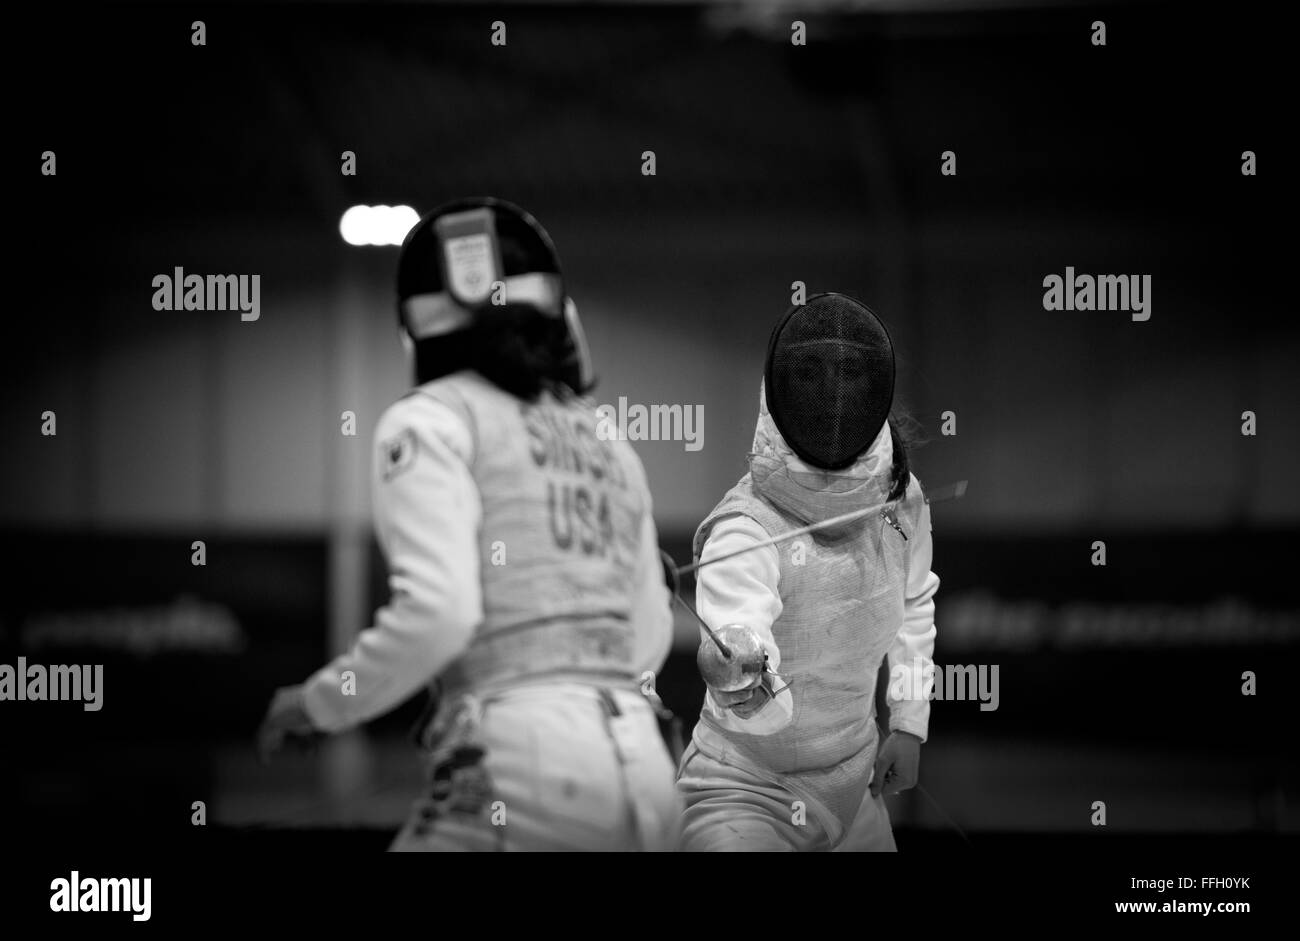 Air Force Academy cadet Madeleine Girardot battles Ambika Singh, from Princeton University, during the 2014 NCAA Fencing Championships at Ohio State University in Columbus, Ohio. Girardot placed 21st in women's foil after winning six out of 24 matches. Stock Photo